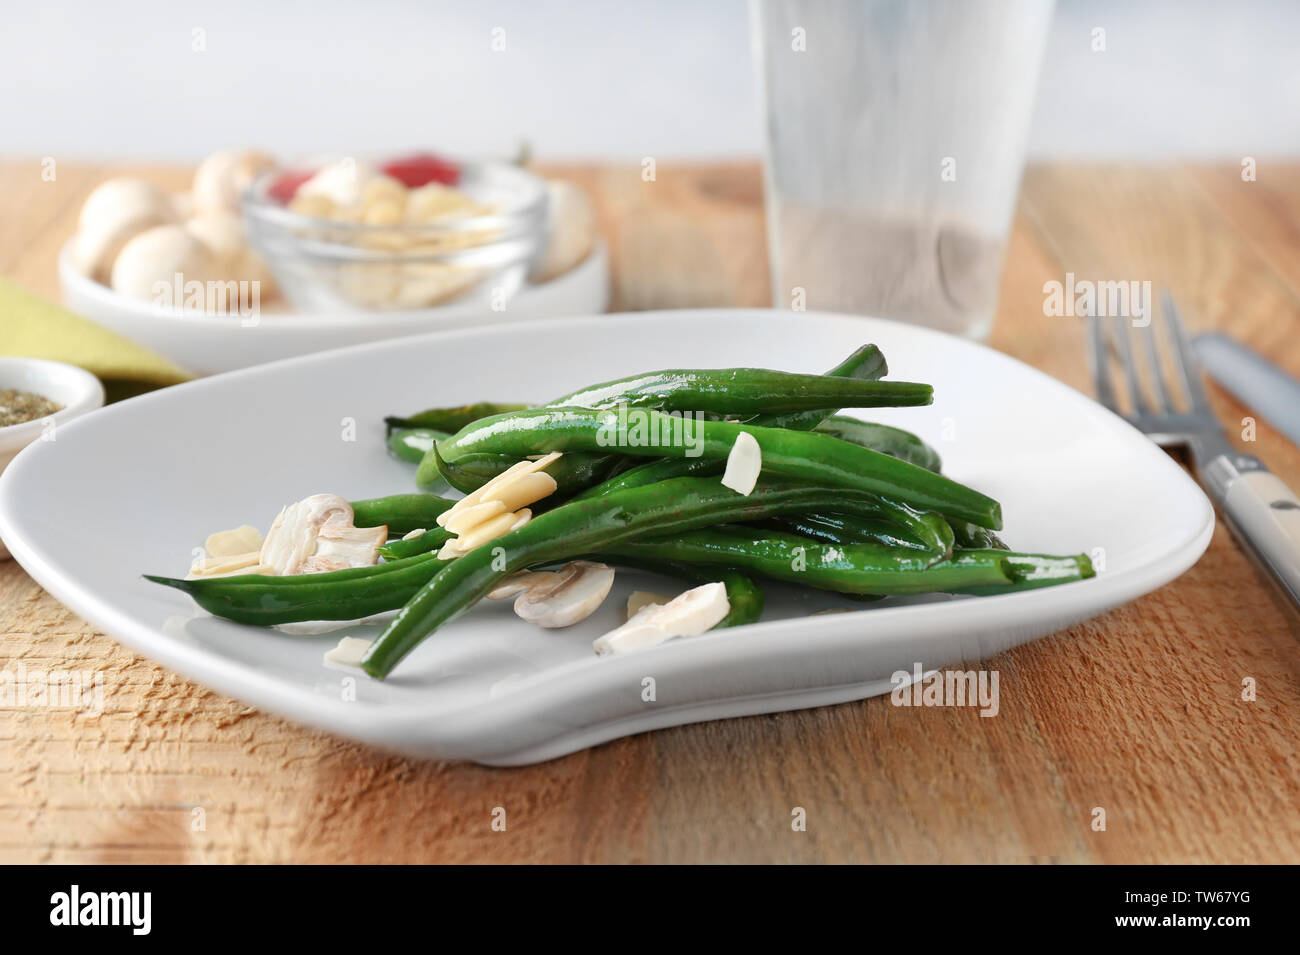 Plate with delicious green beans, almond and mushrooms on table Stock Photo